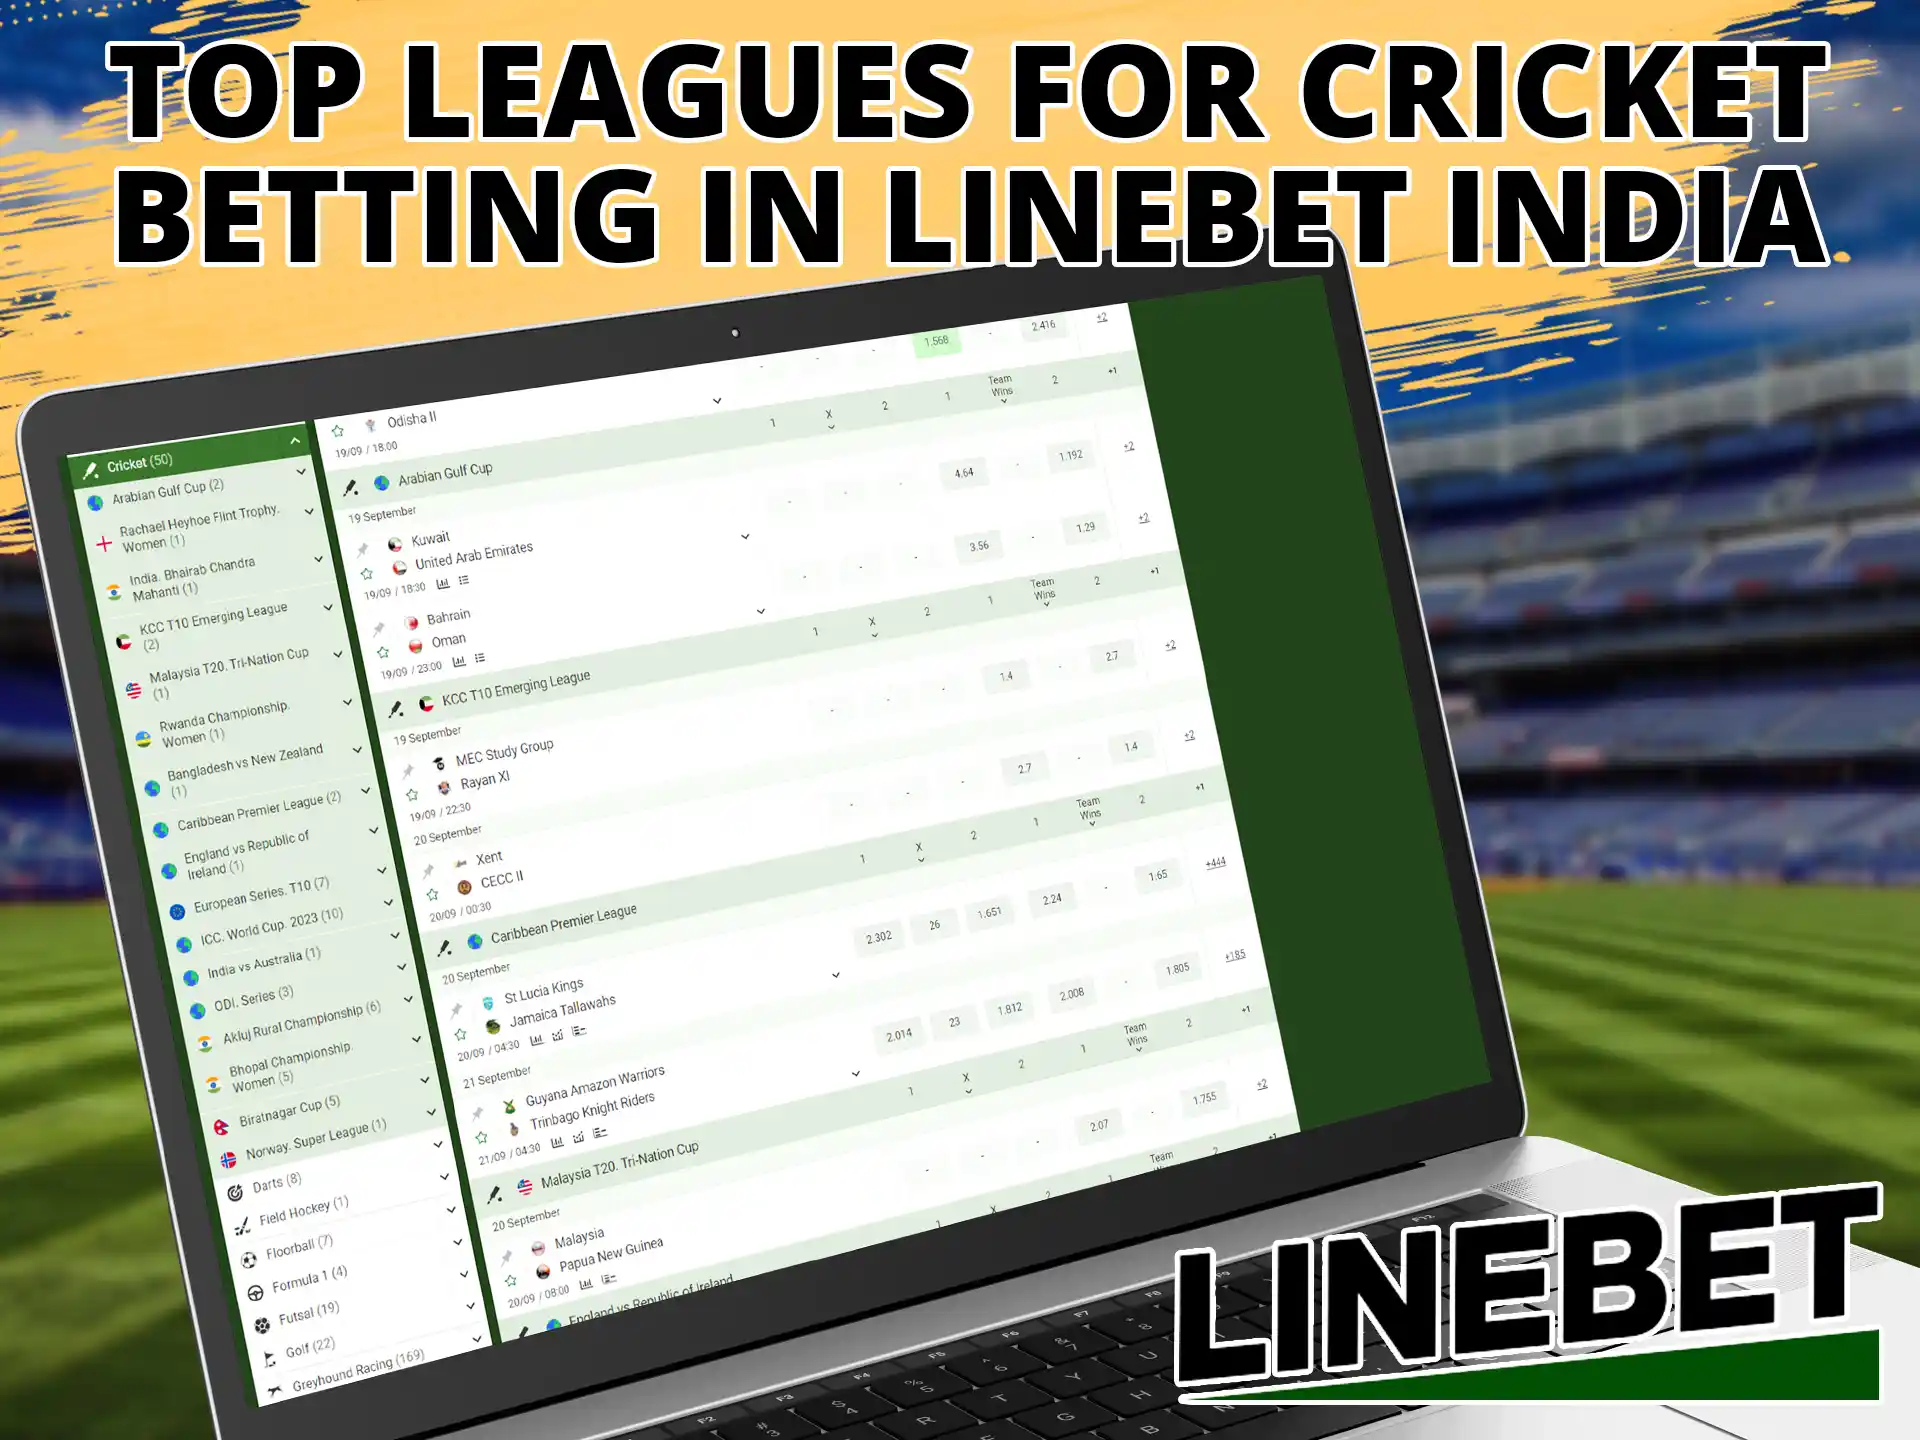 Linebet features many cricket events international and local.